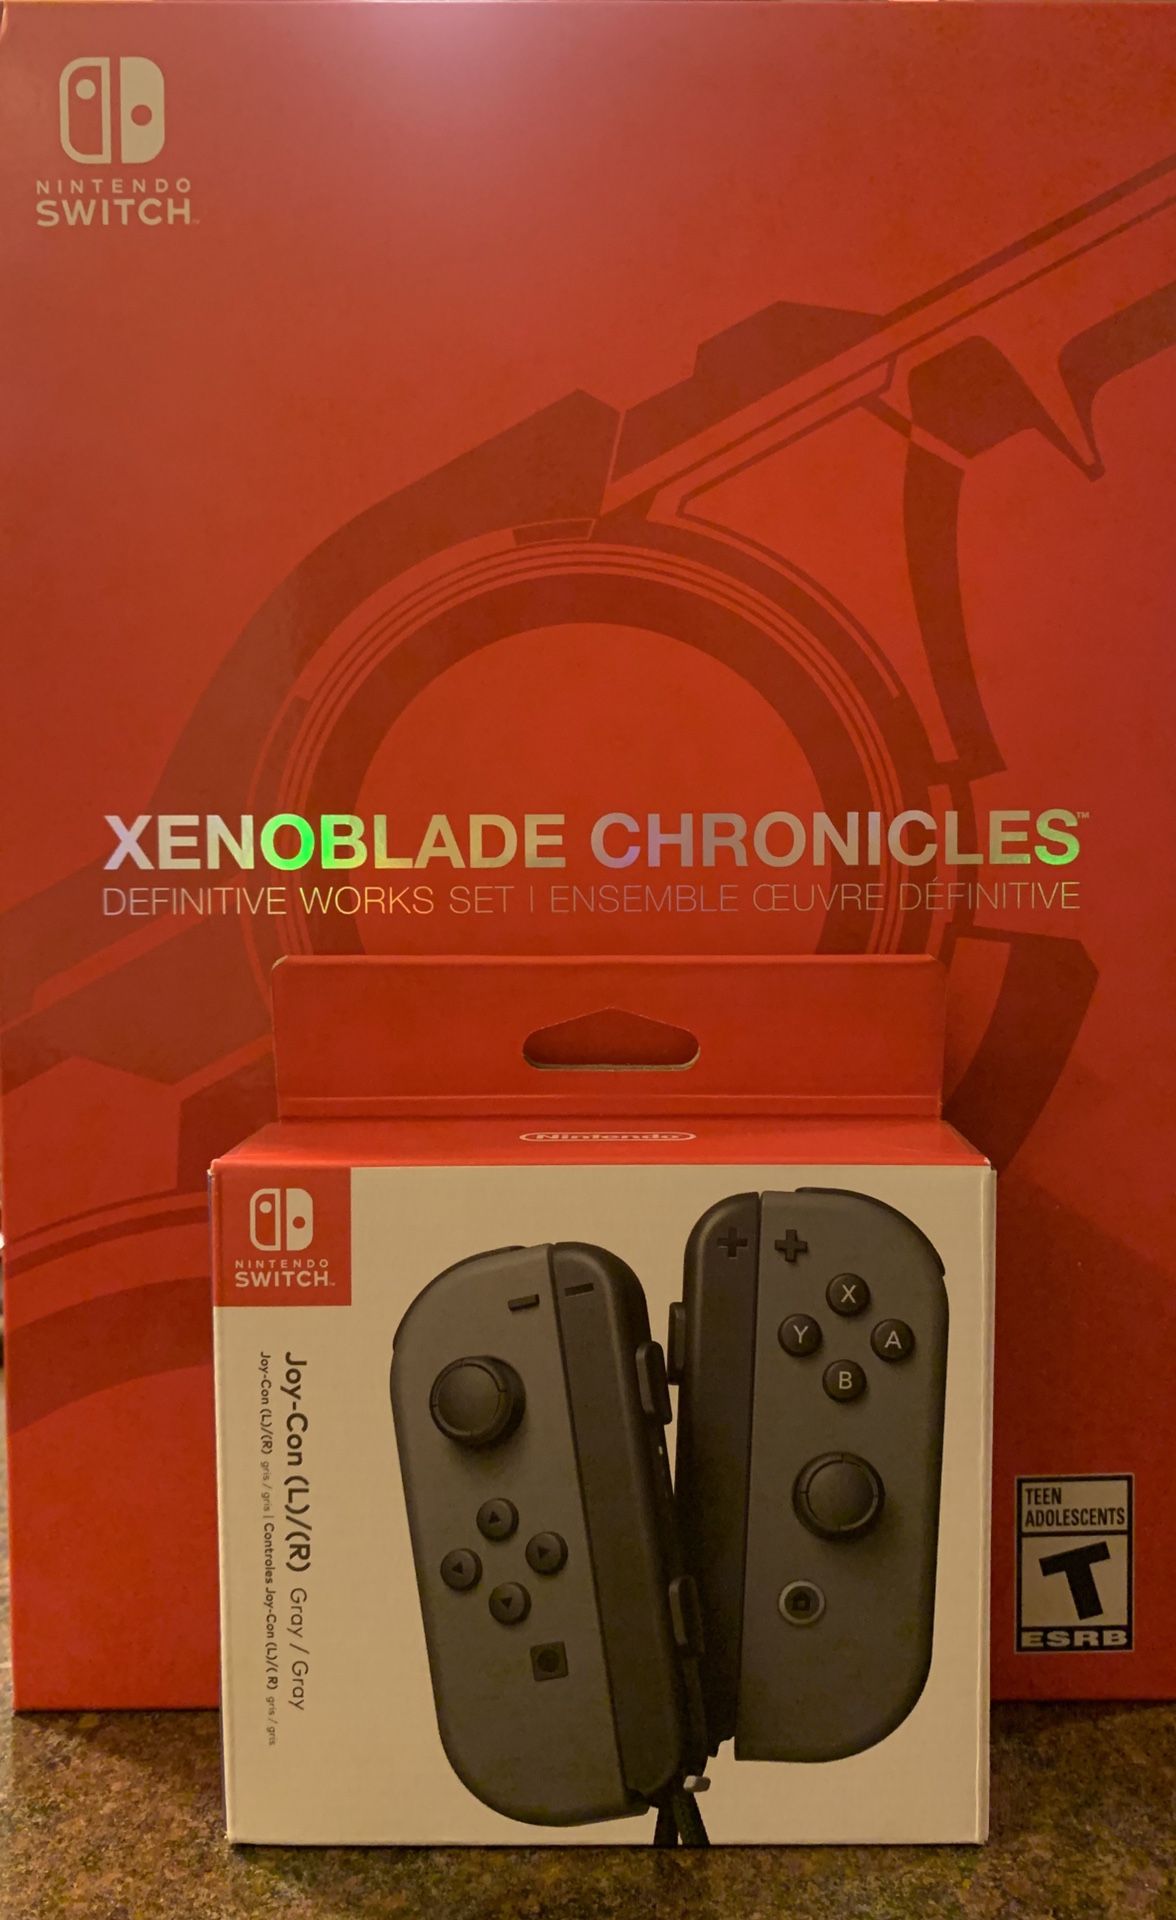 Nintendo Switch joycons and Xenoblade Chronicles special edition bundle